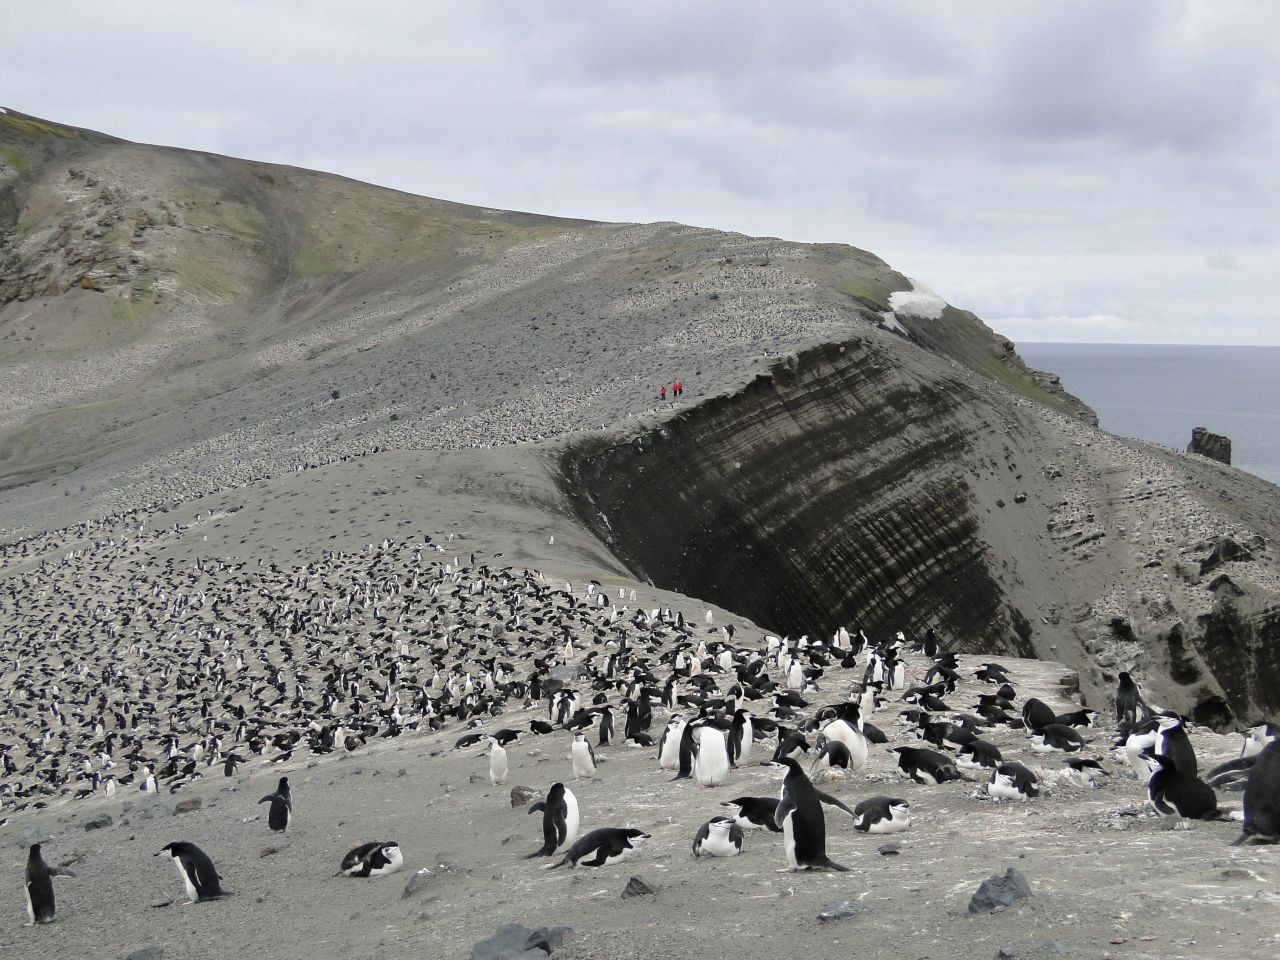 On Deception Island, Pardo fondly remembers the "highways of penguins" following one another along certain paths. It's easy to tell which direction they're going depending on whether their black or white side is visible, she explains.